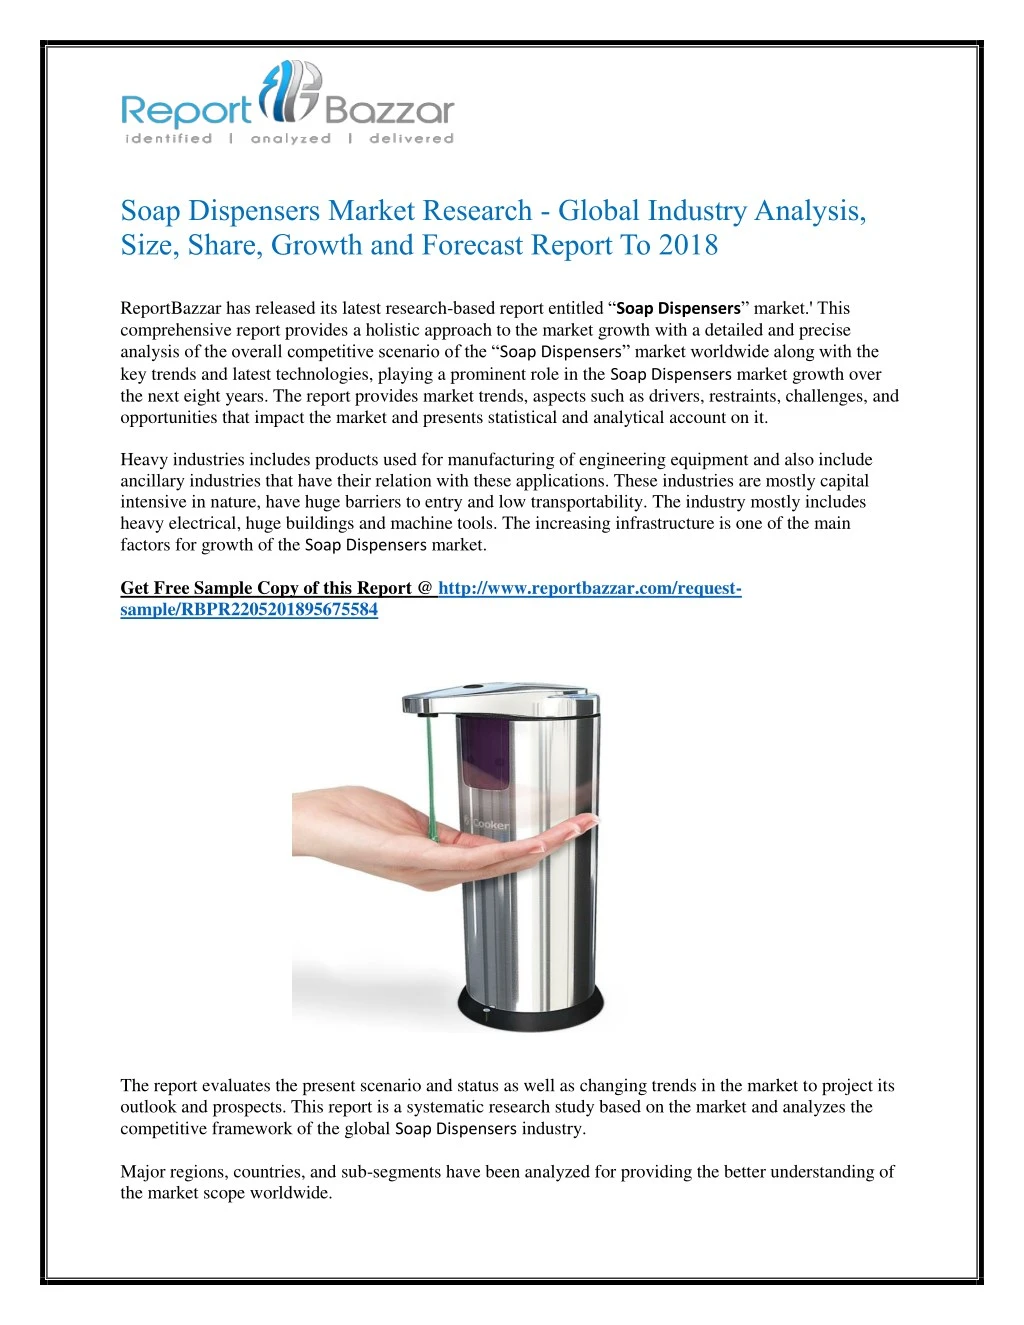 soap dispensers market research global industry